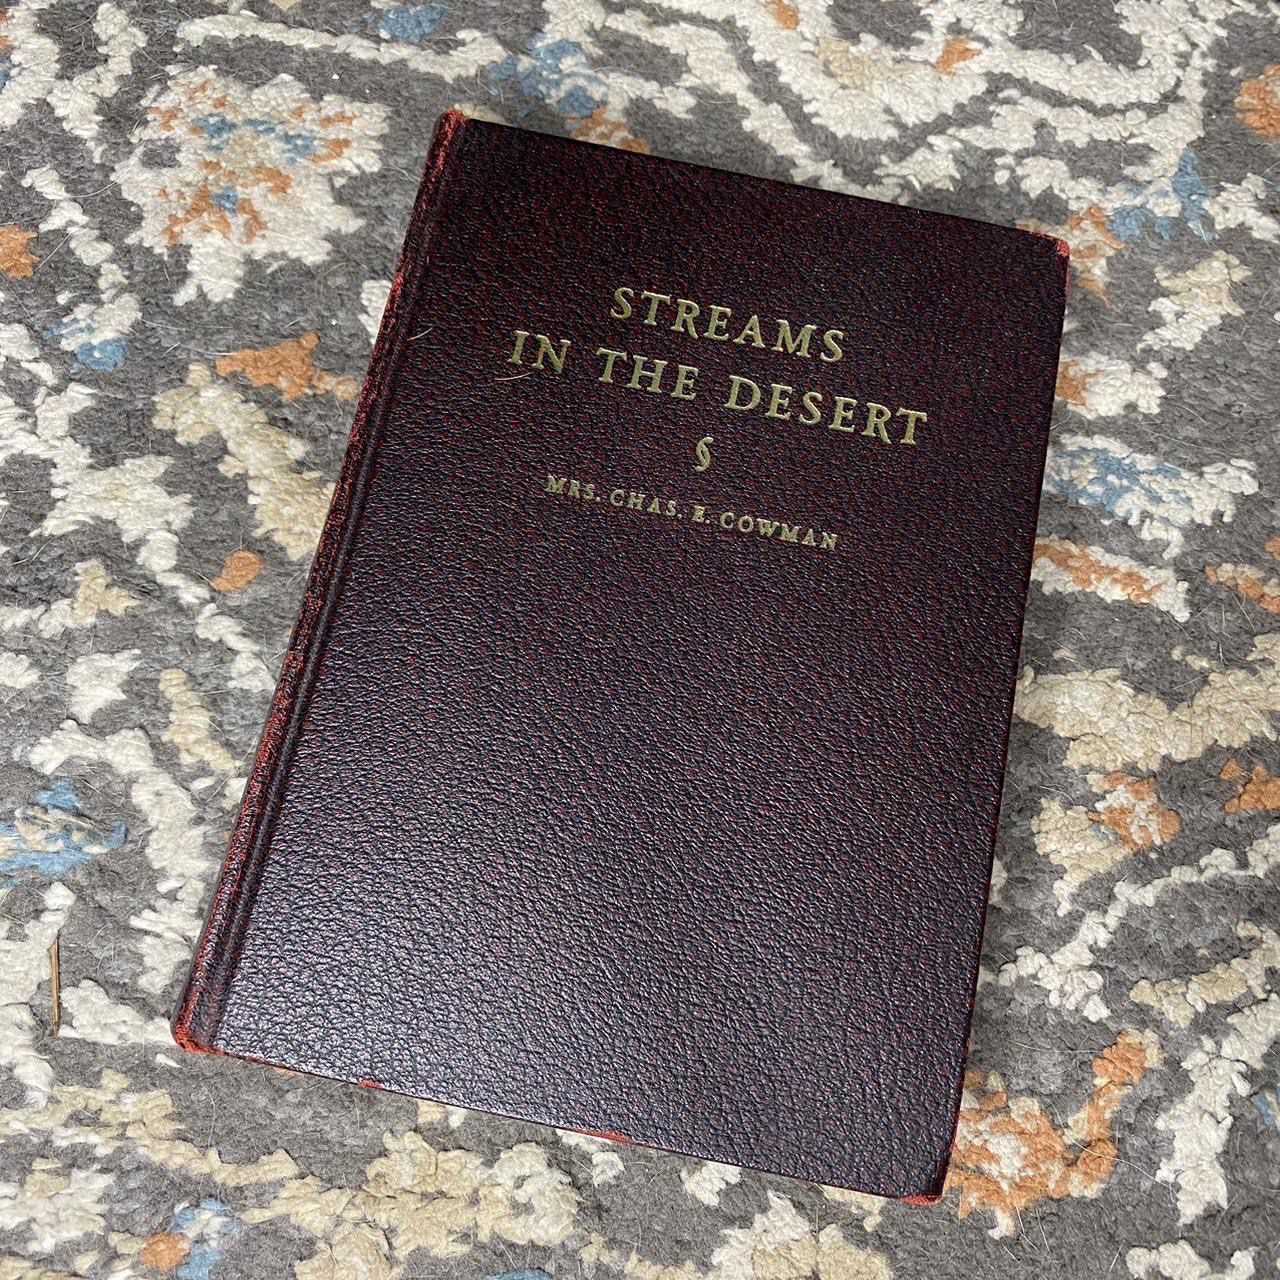 “Streams In The Desert” Daily Devotional Reading by Mrs. Chas. E. Cowman